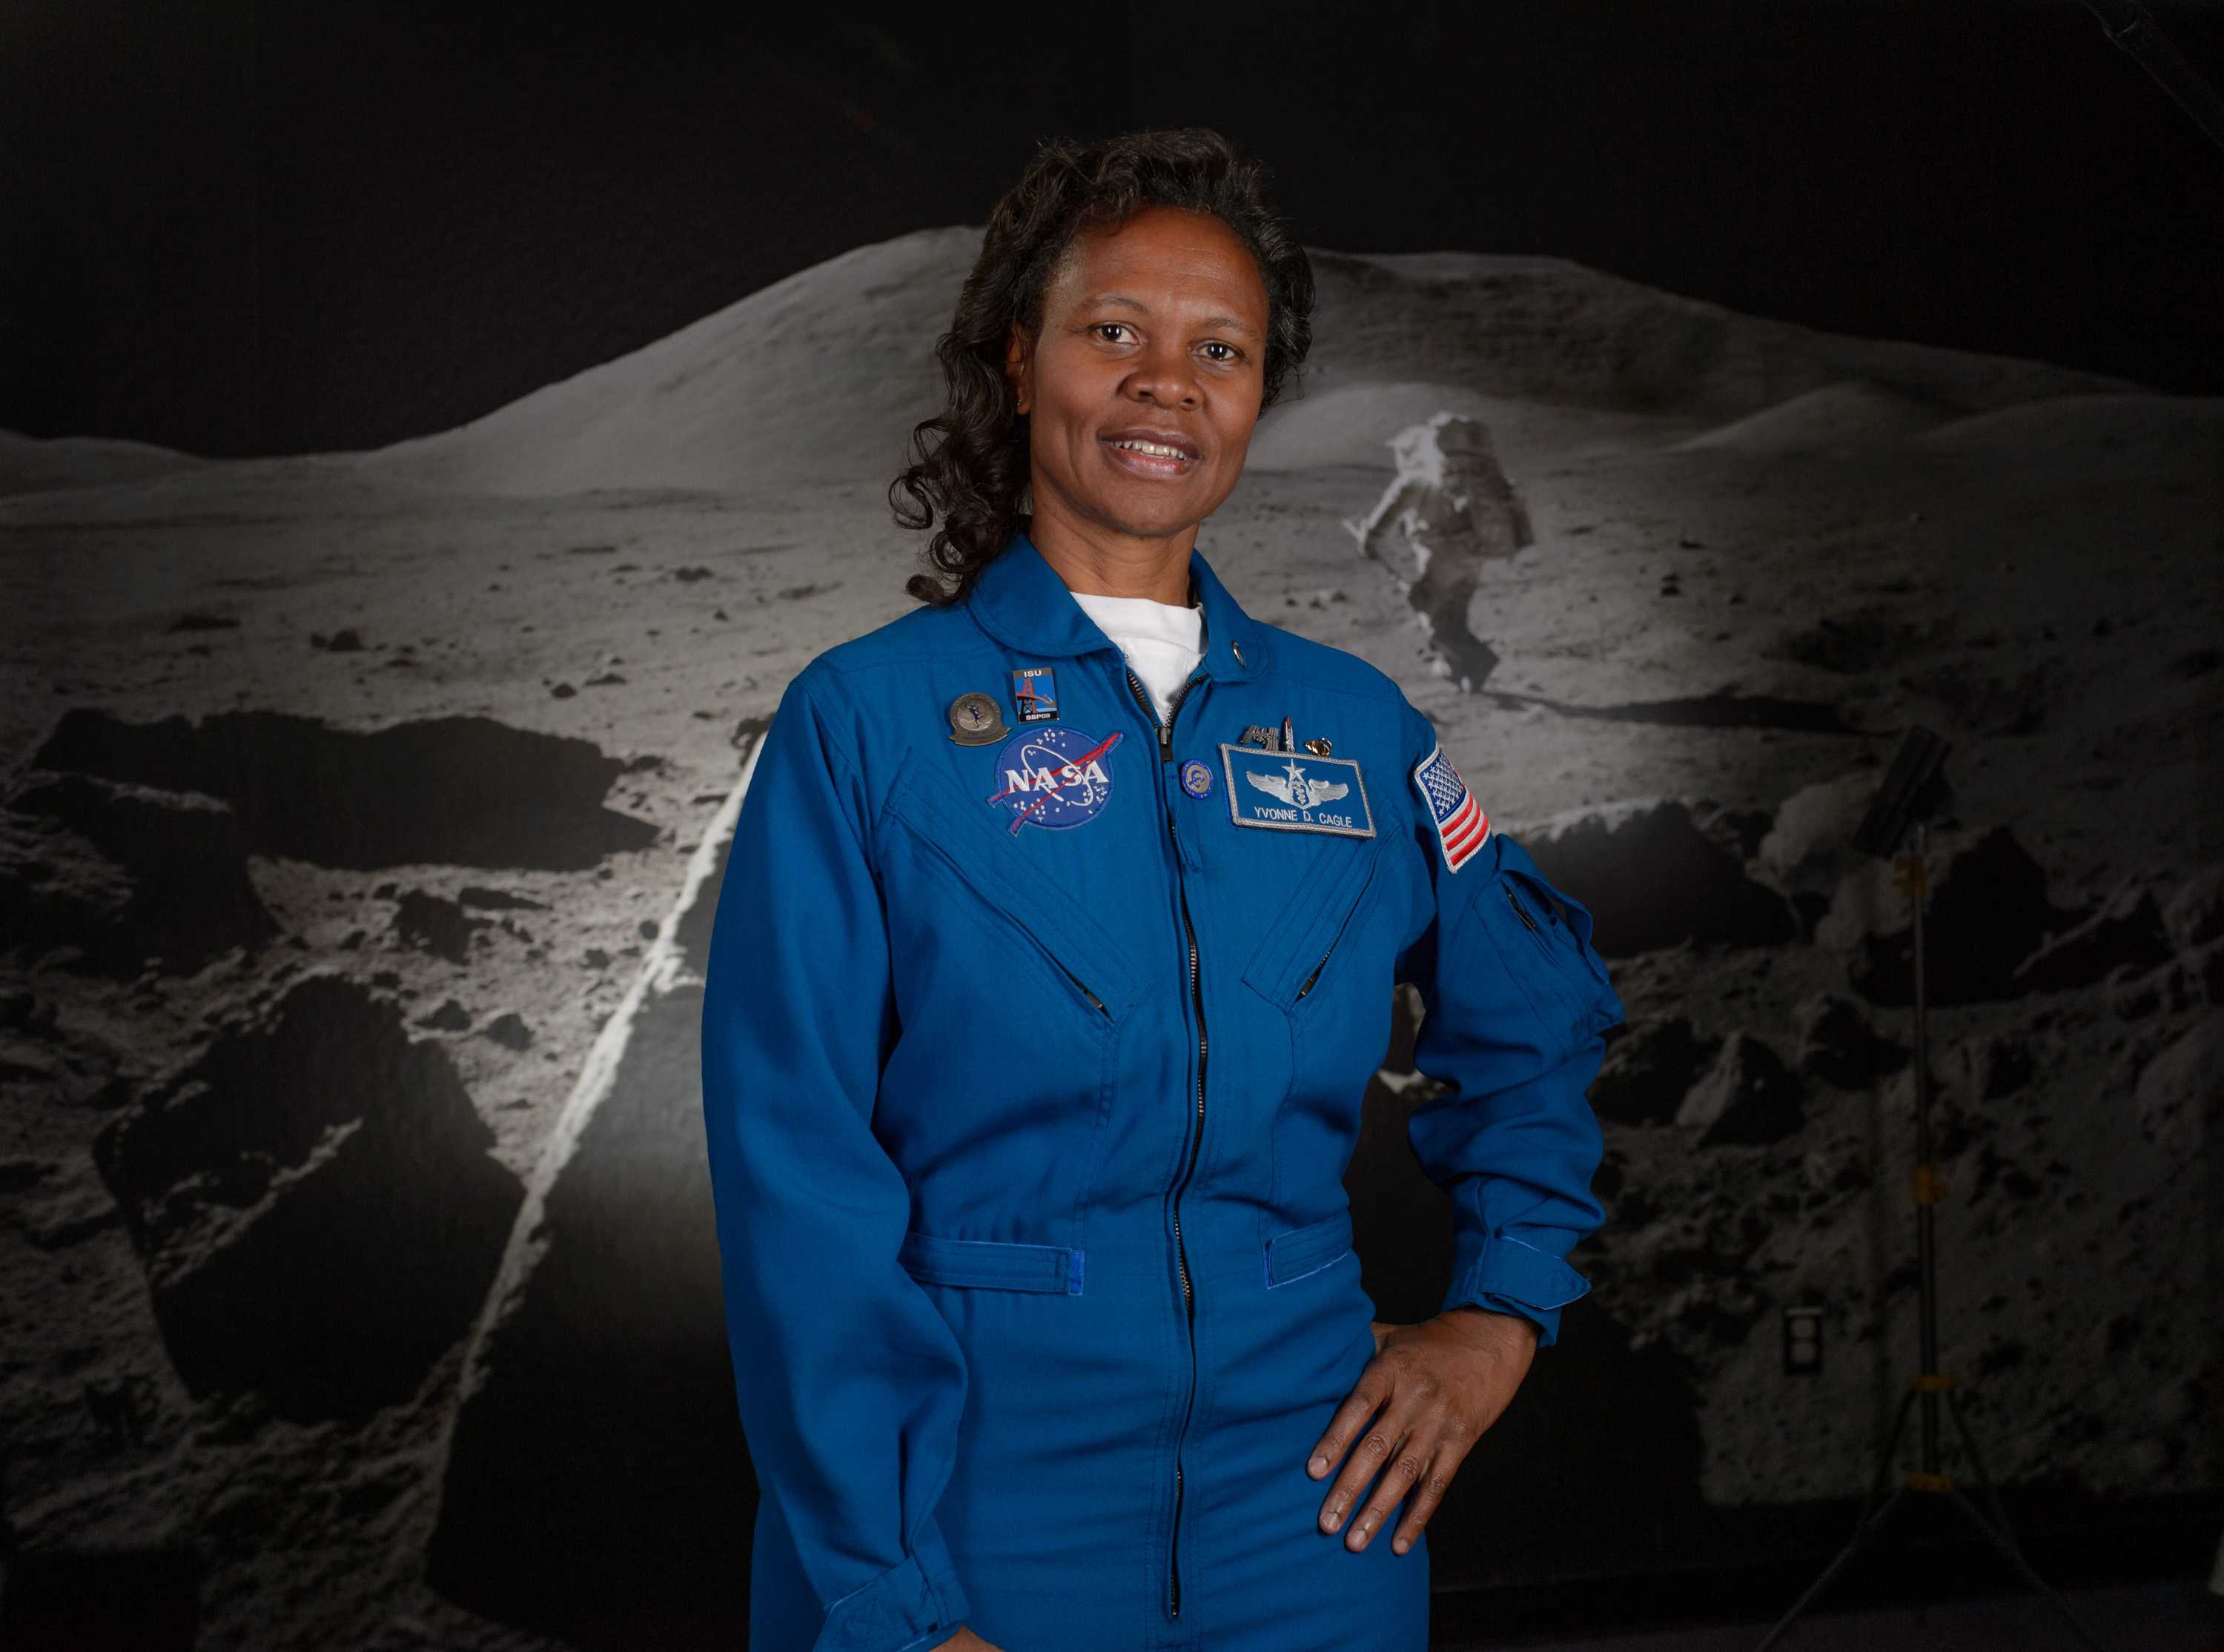 Yvonne Cagle poses with one hand on her hip in a blue NASA suit in front of a moon background.